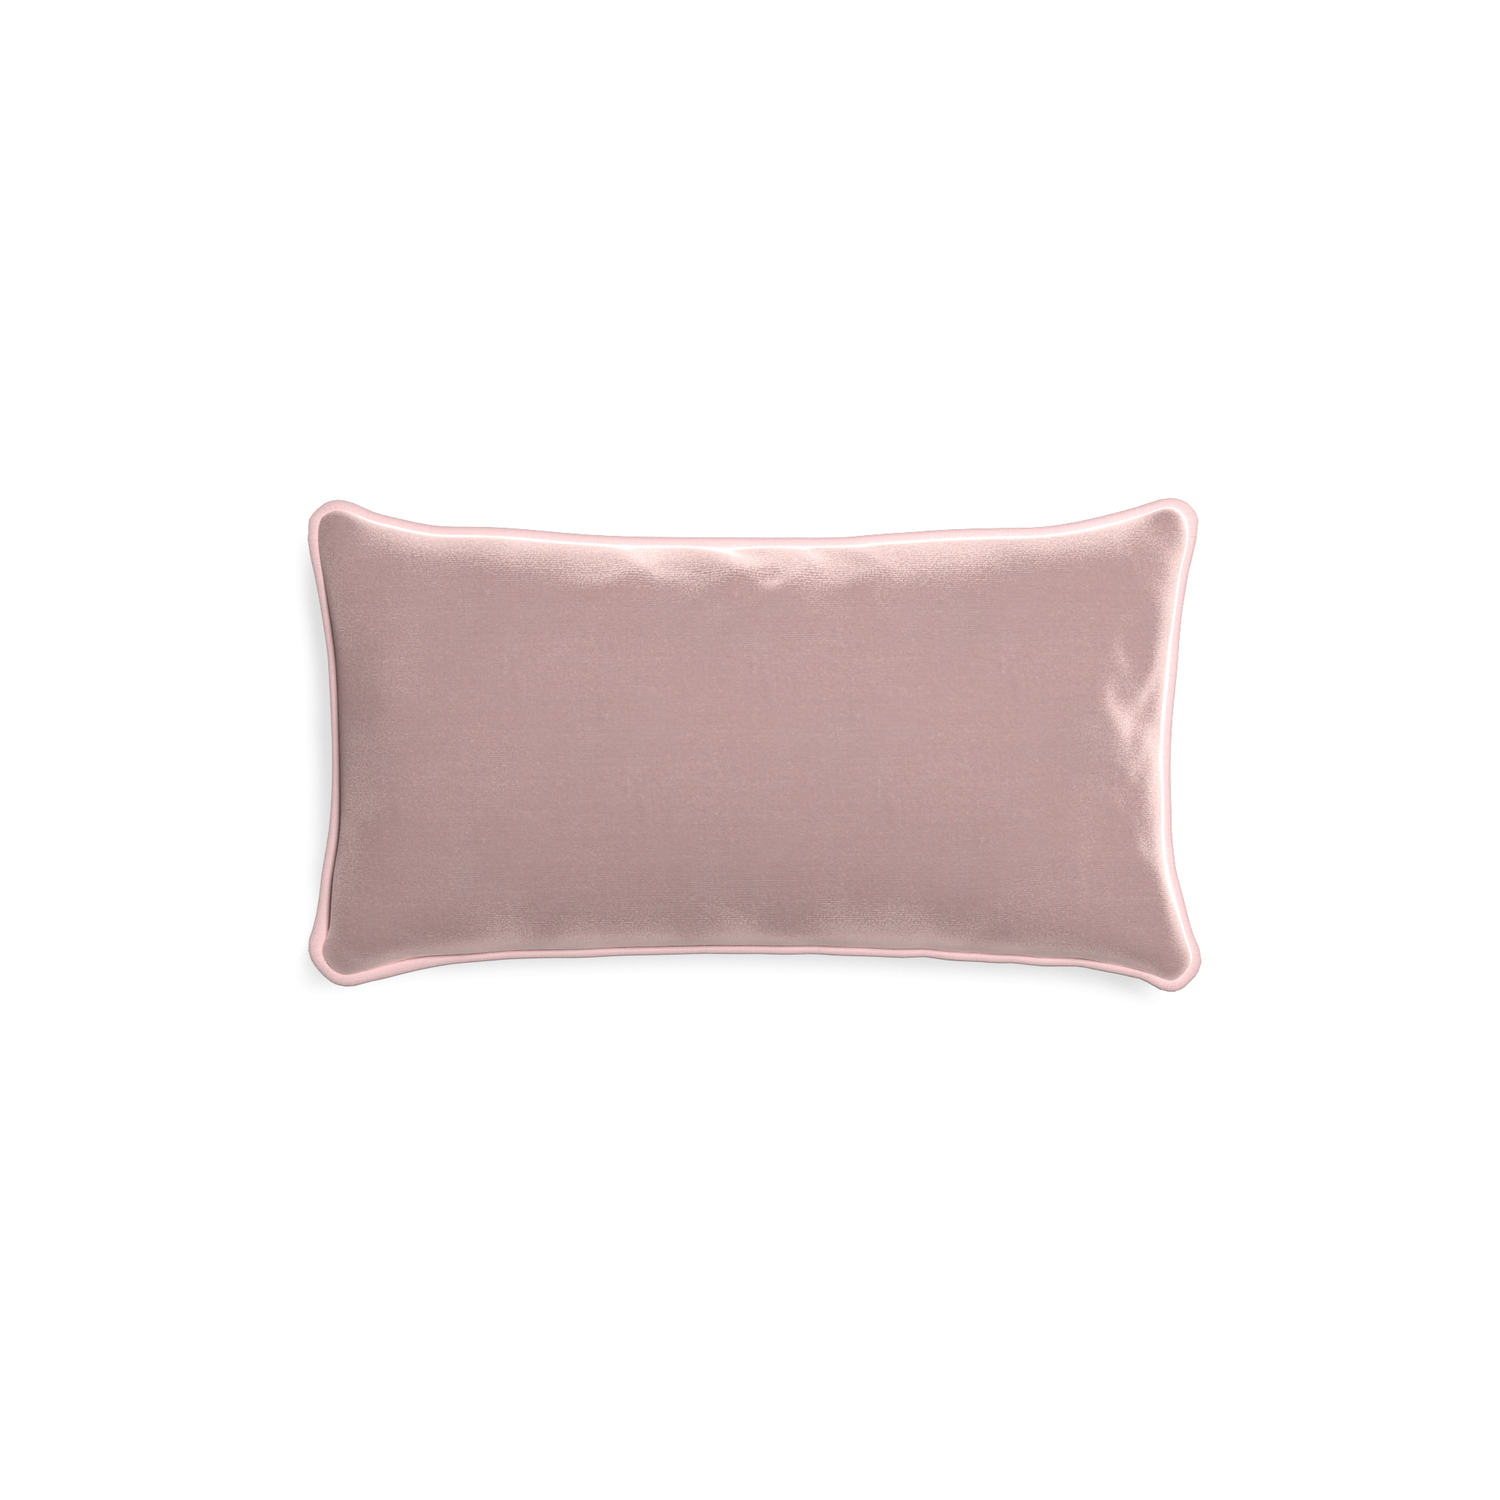 rectangle mauve velvet pillow with light pink piping